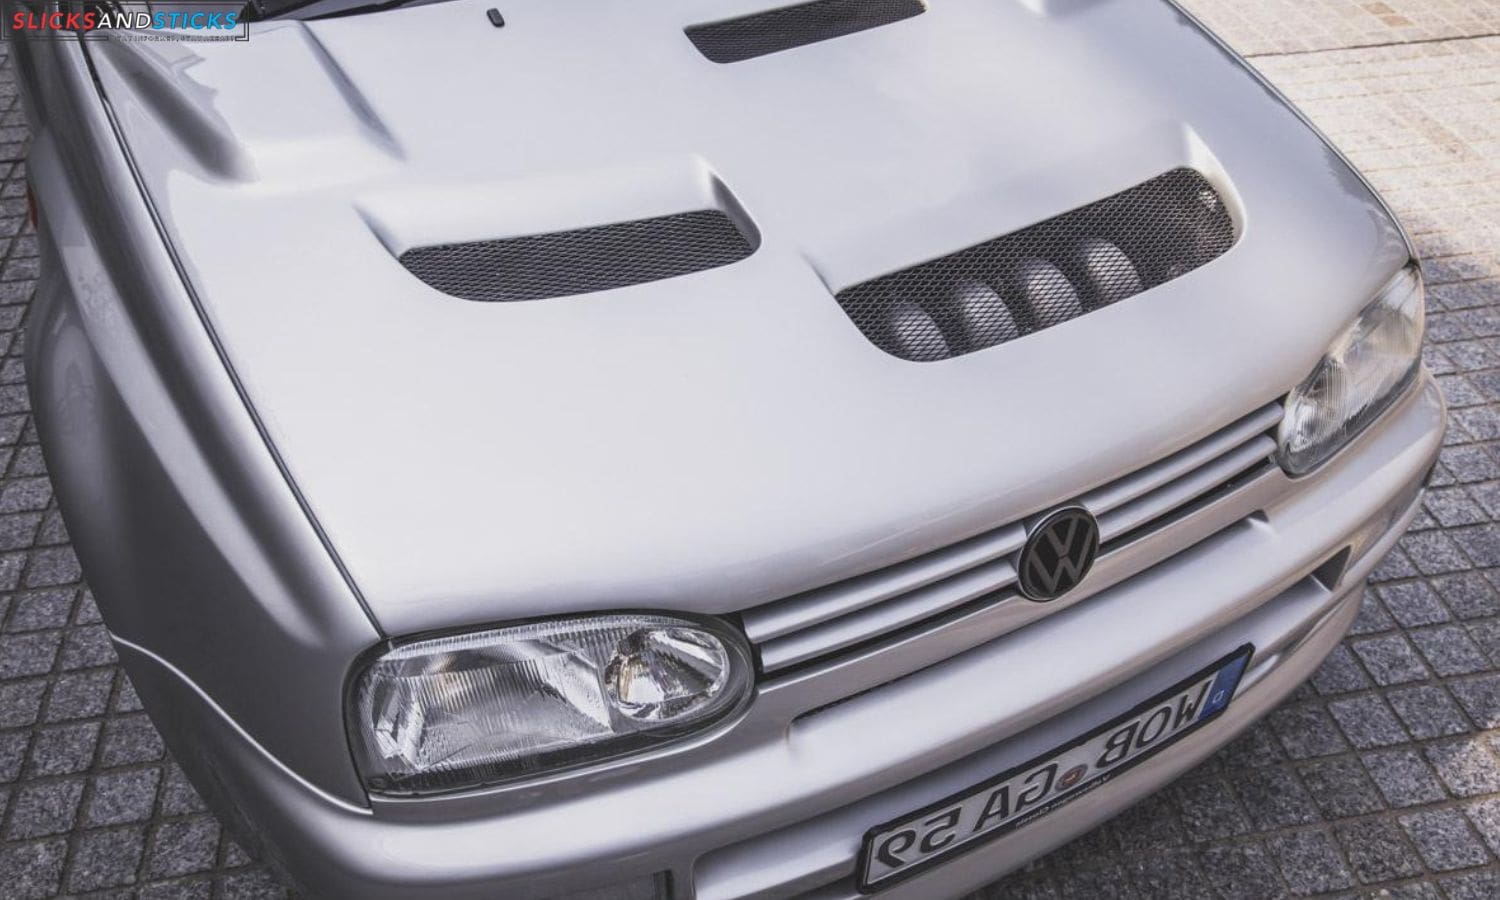 volkswagen-a59-project-the-unfinished-rally-transformation-of-golf-3-2